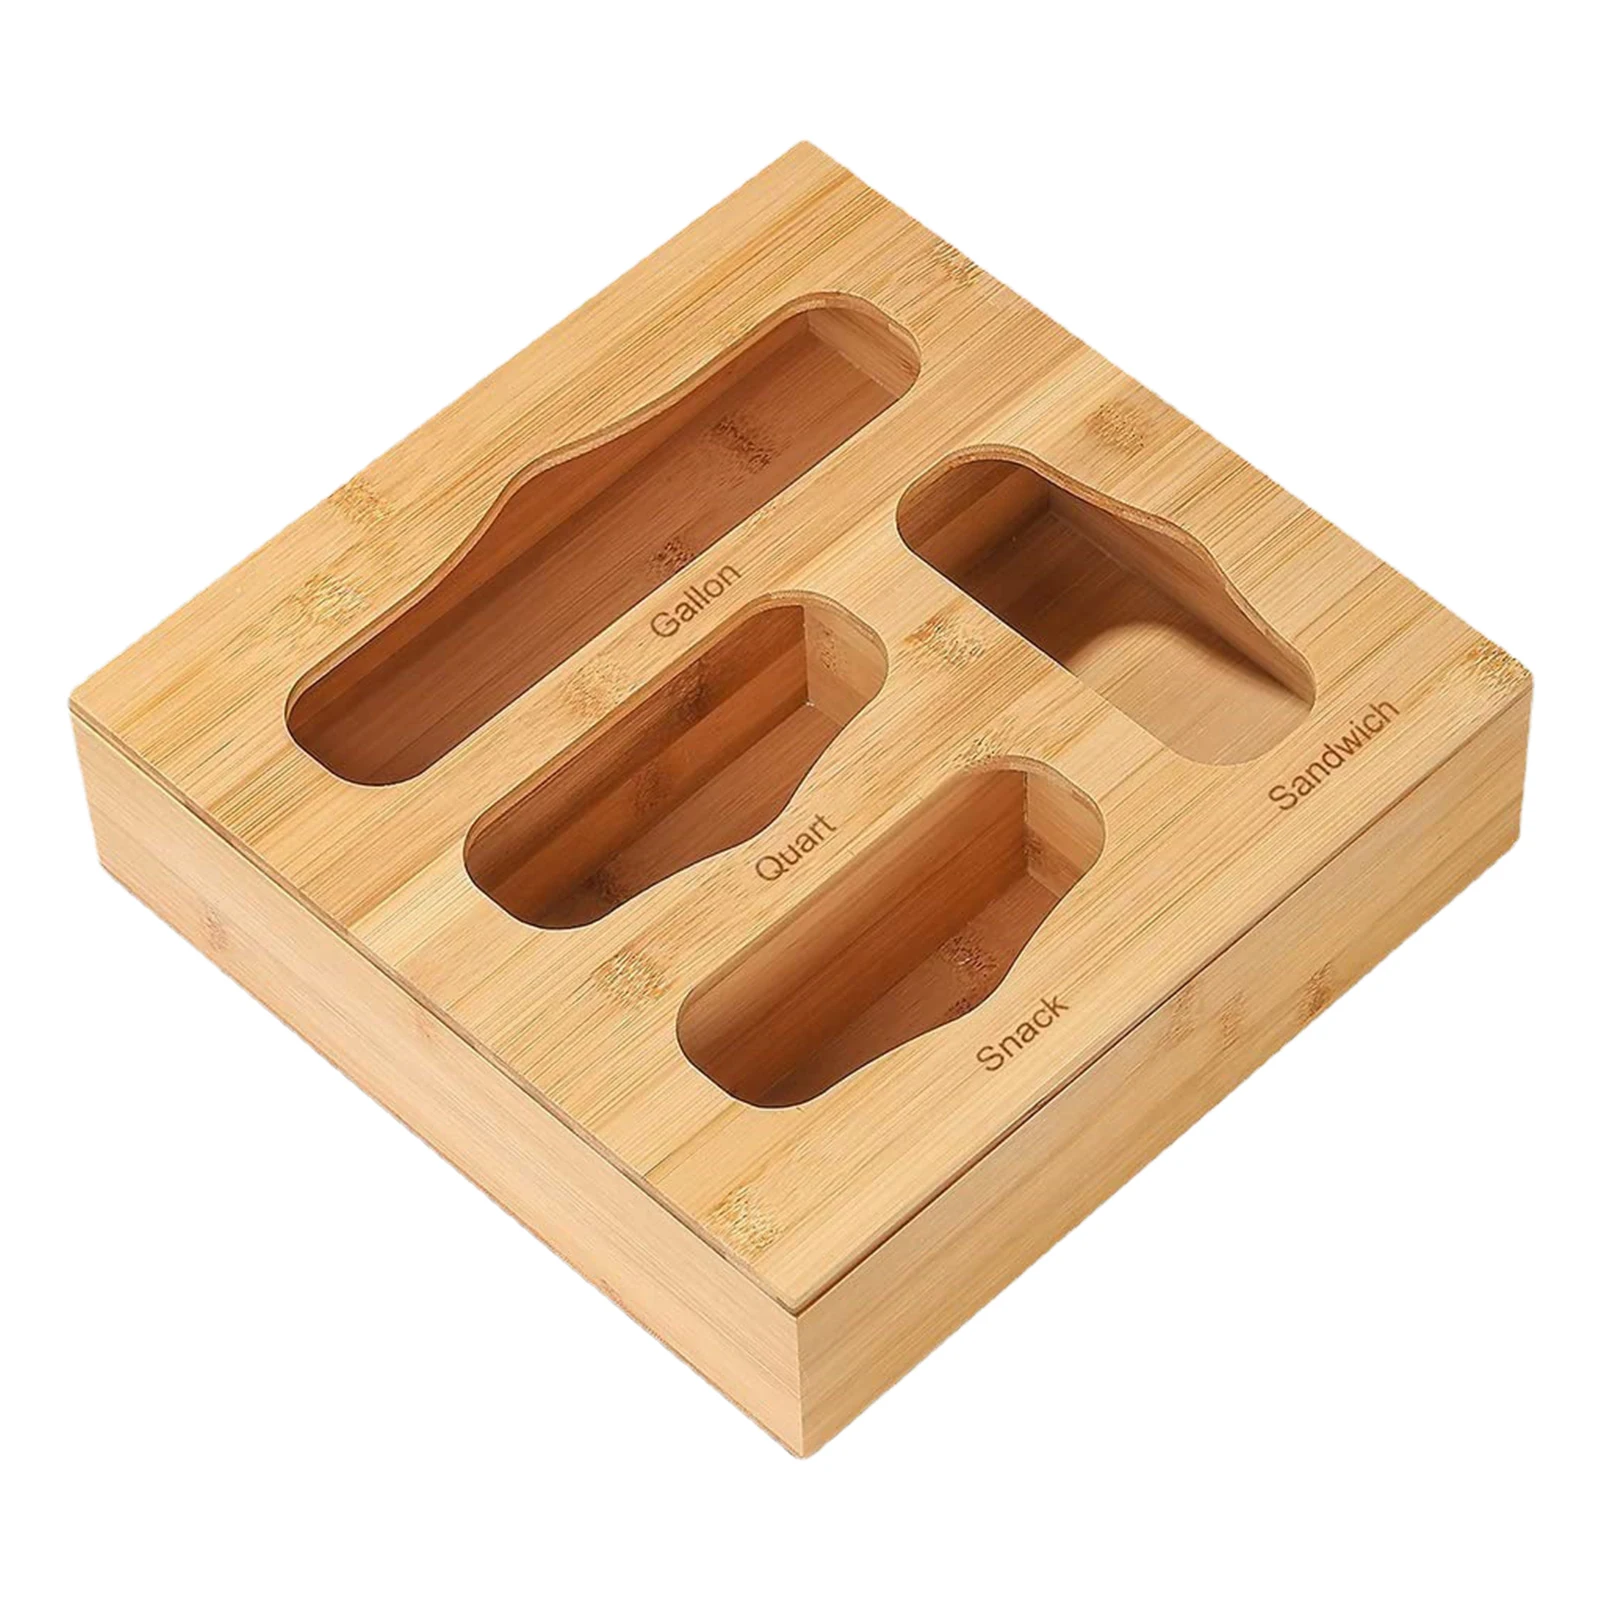 

2022 Bamboo Food Storage Bag Holder For Kitchen Drawer, Sandwich Bag Organizer for Gallon Sandwich & Snack and Variety Size Bag